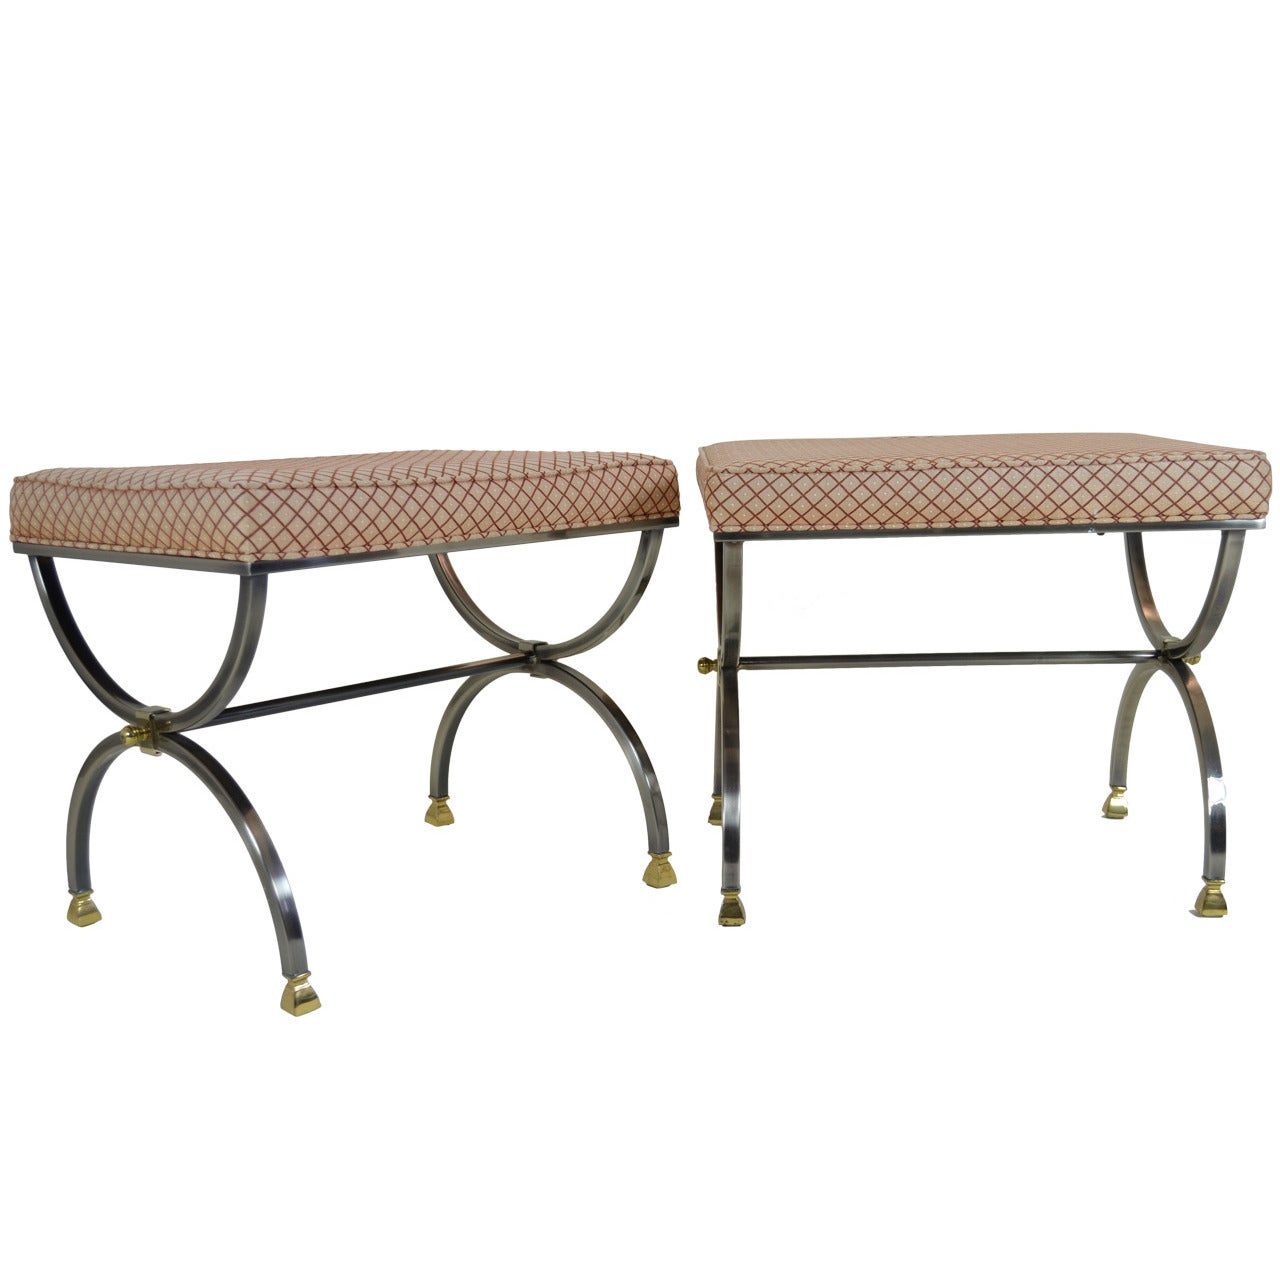 Pair of Brushed Steel and Brass Benches